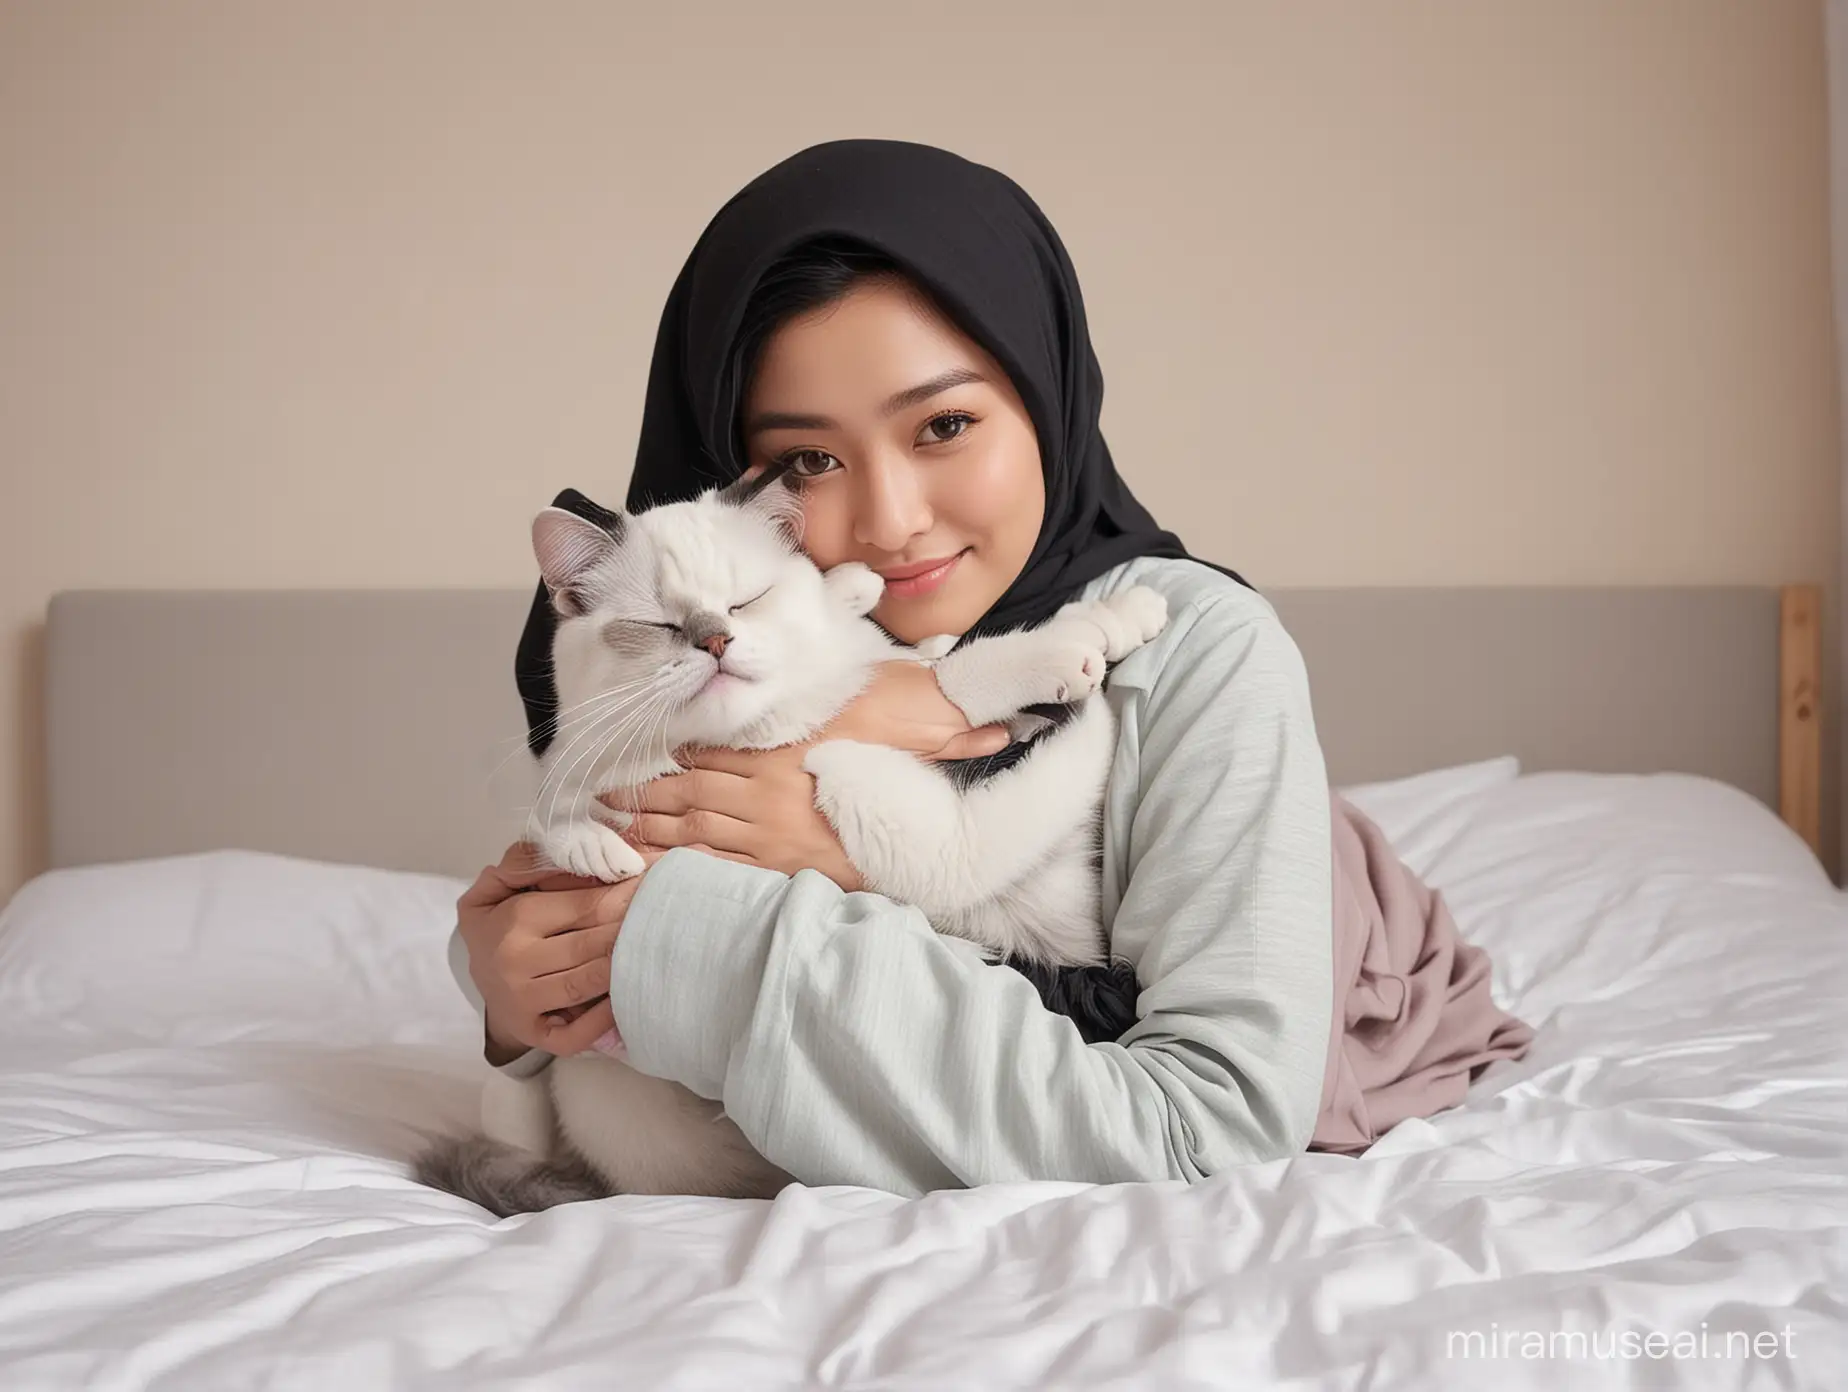 Asian Girl in Hijab Cuddling with a Cat on Bed